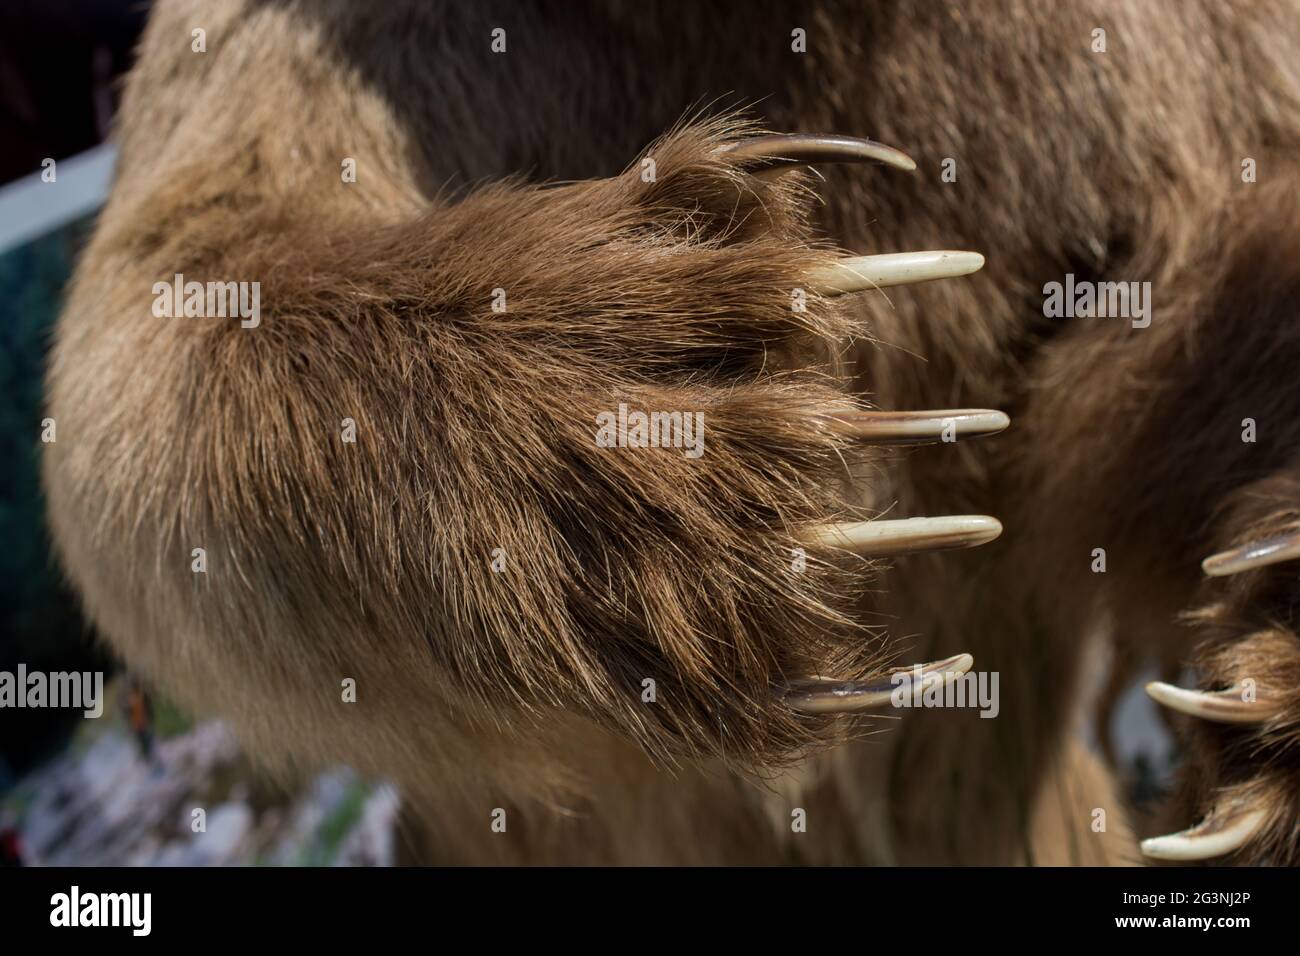 Brown Bear Paw With sharp Claws Stock Photo